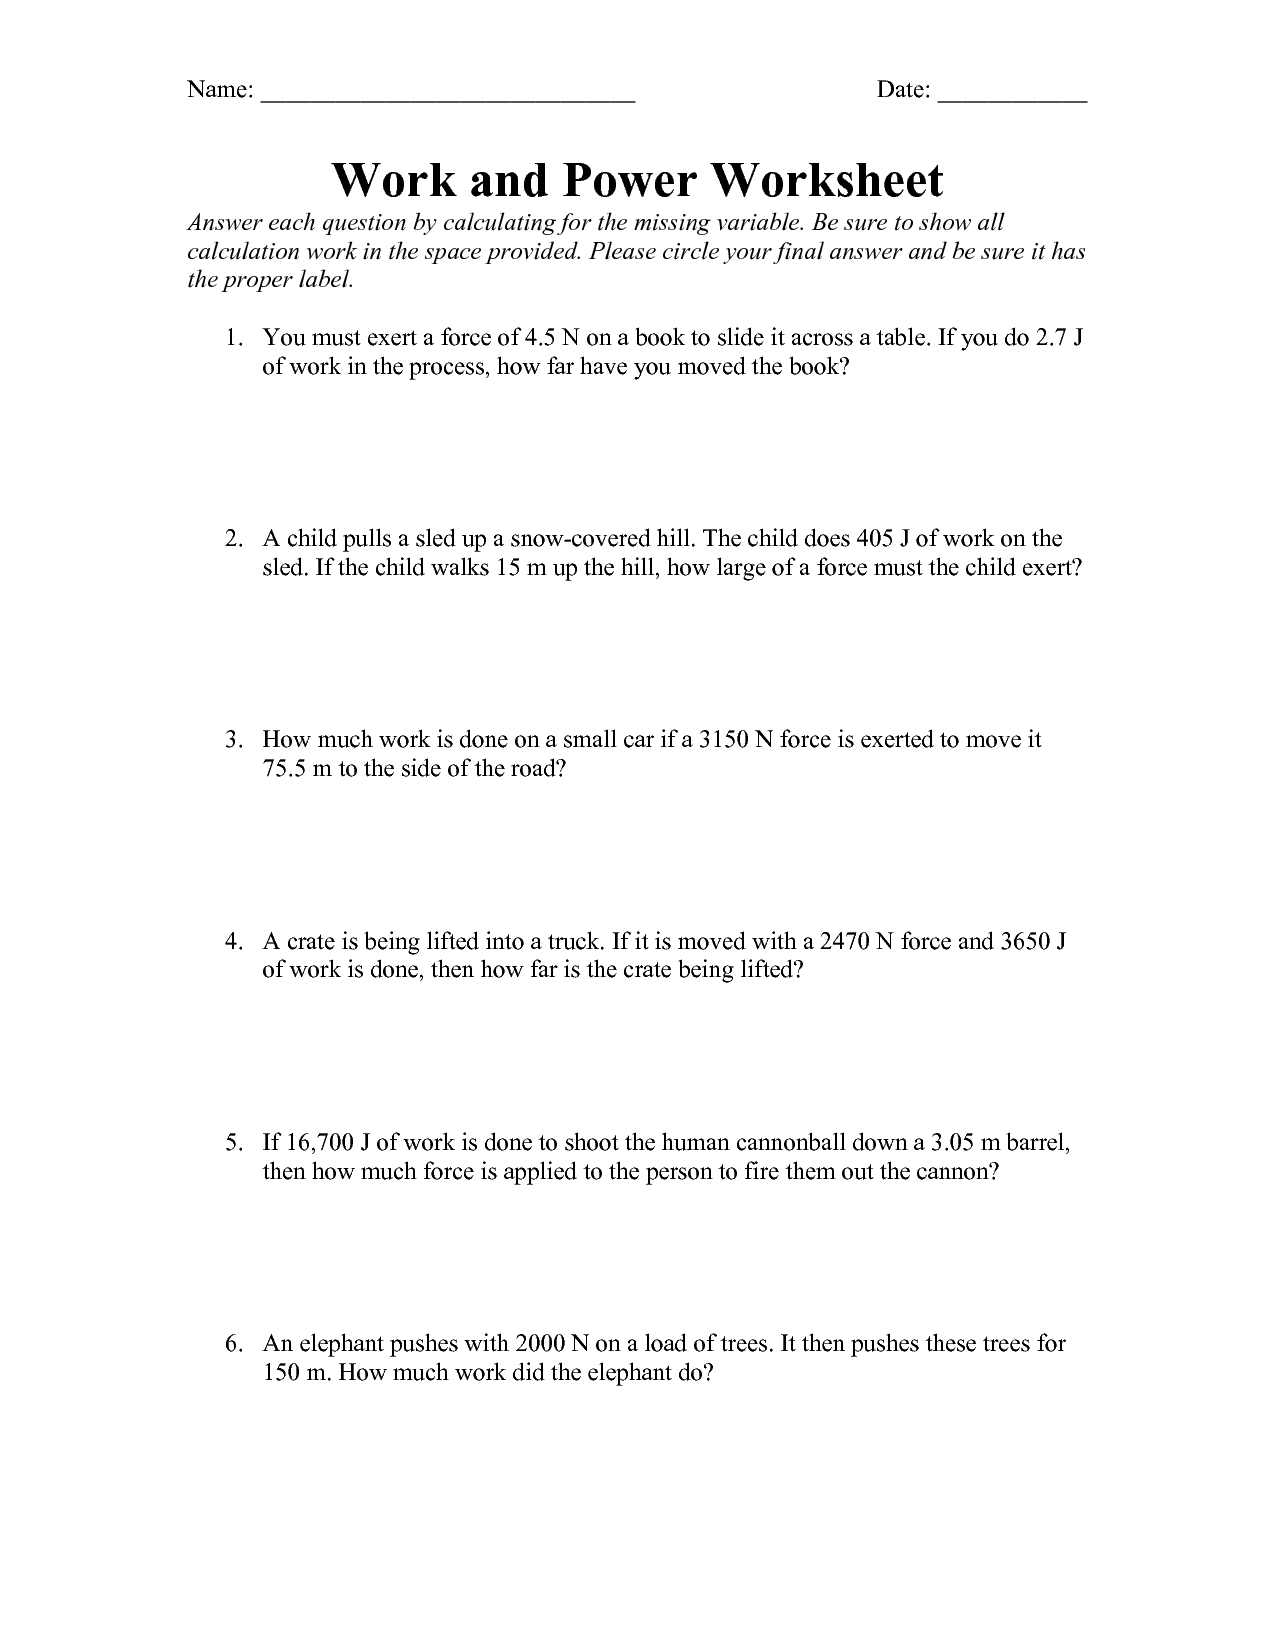 18 Best Images of Science World Worksheet Answers - Electromagnetic